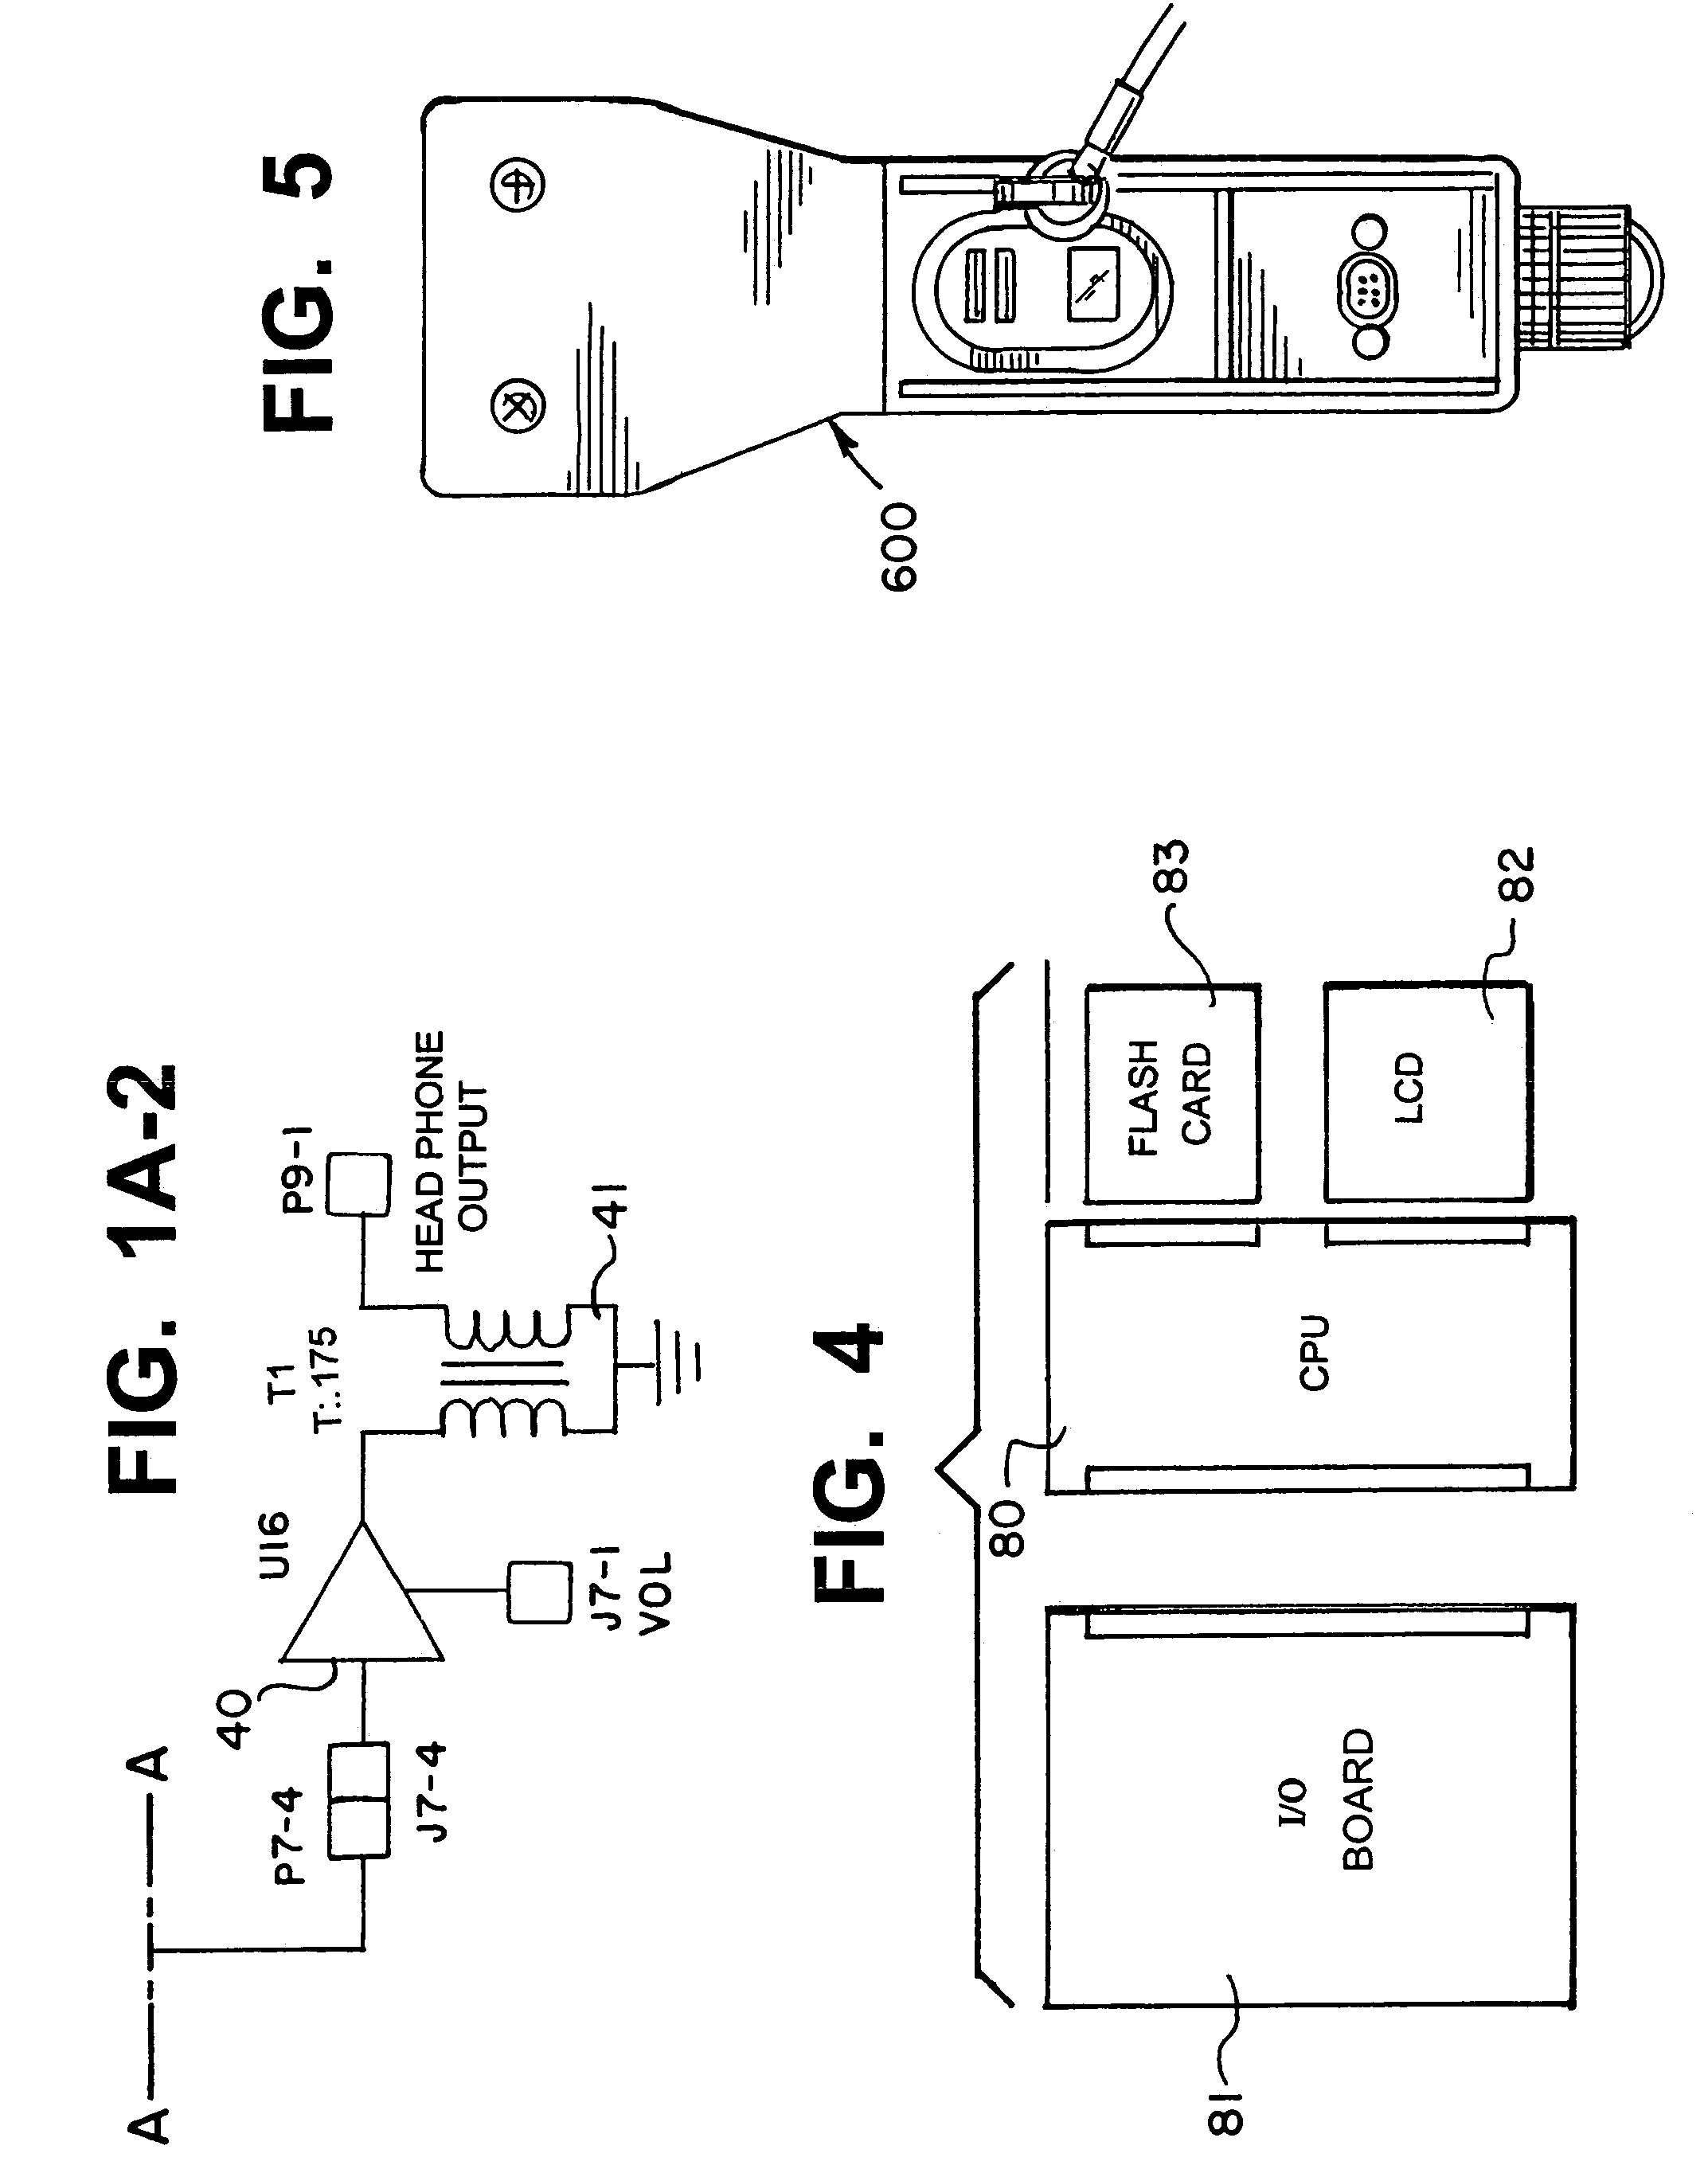 Apparatus and method for minimizing reception nulls in heterodyned ultrasonic signals